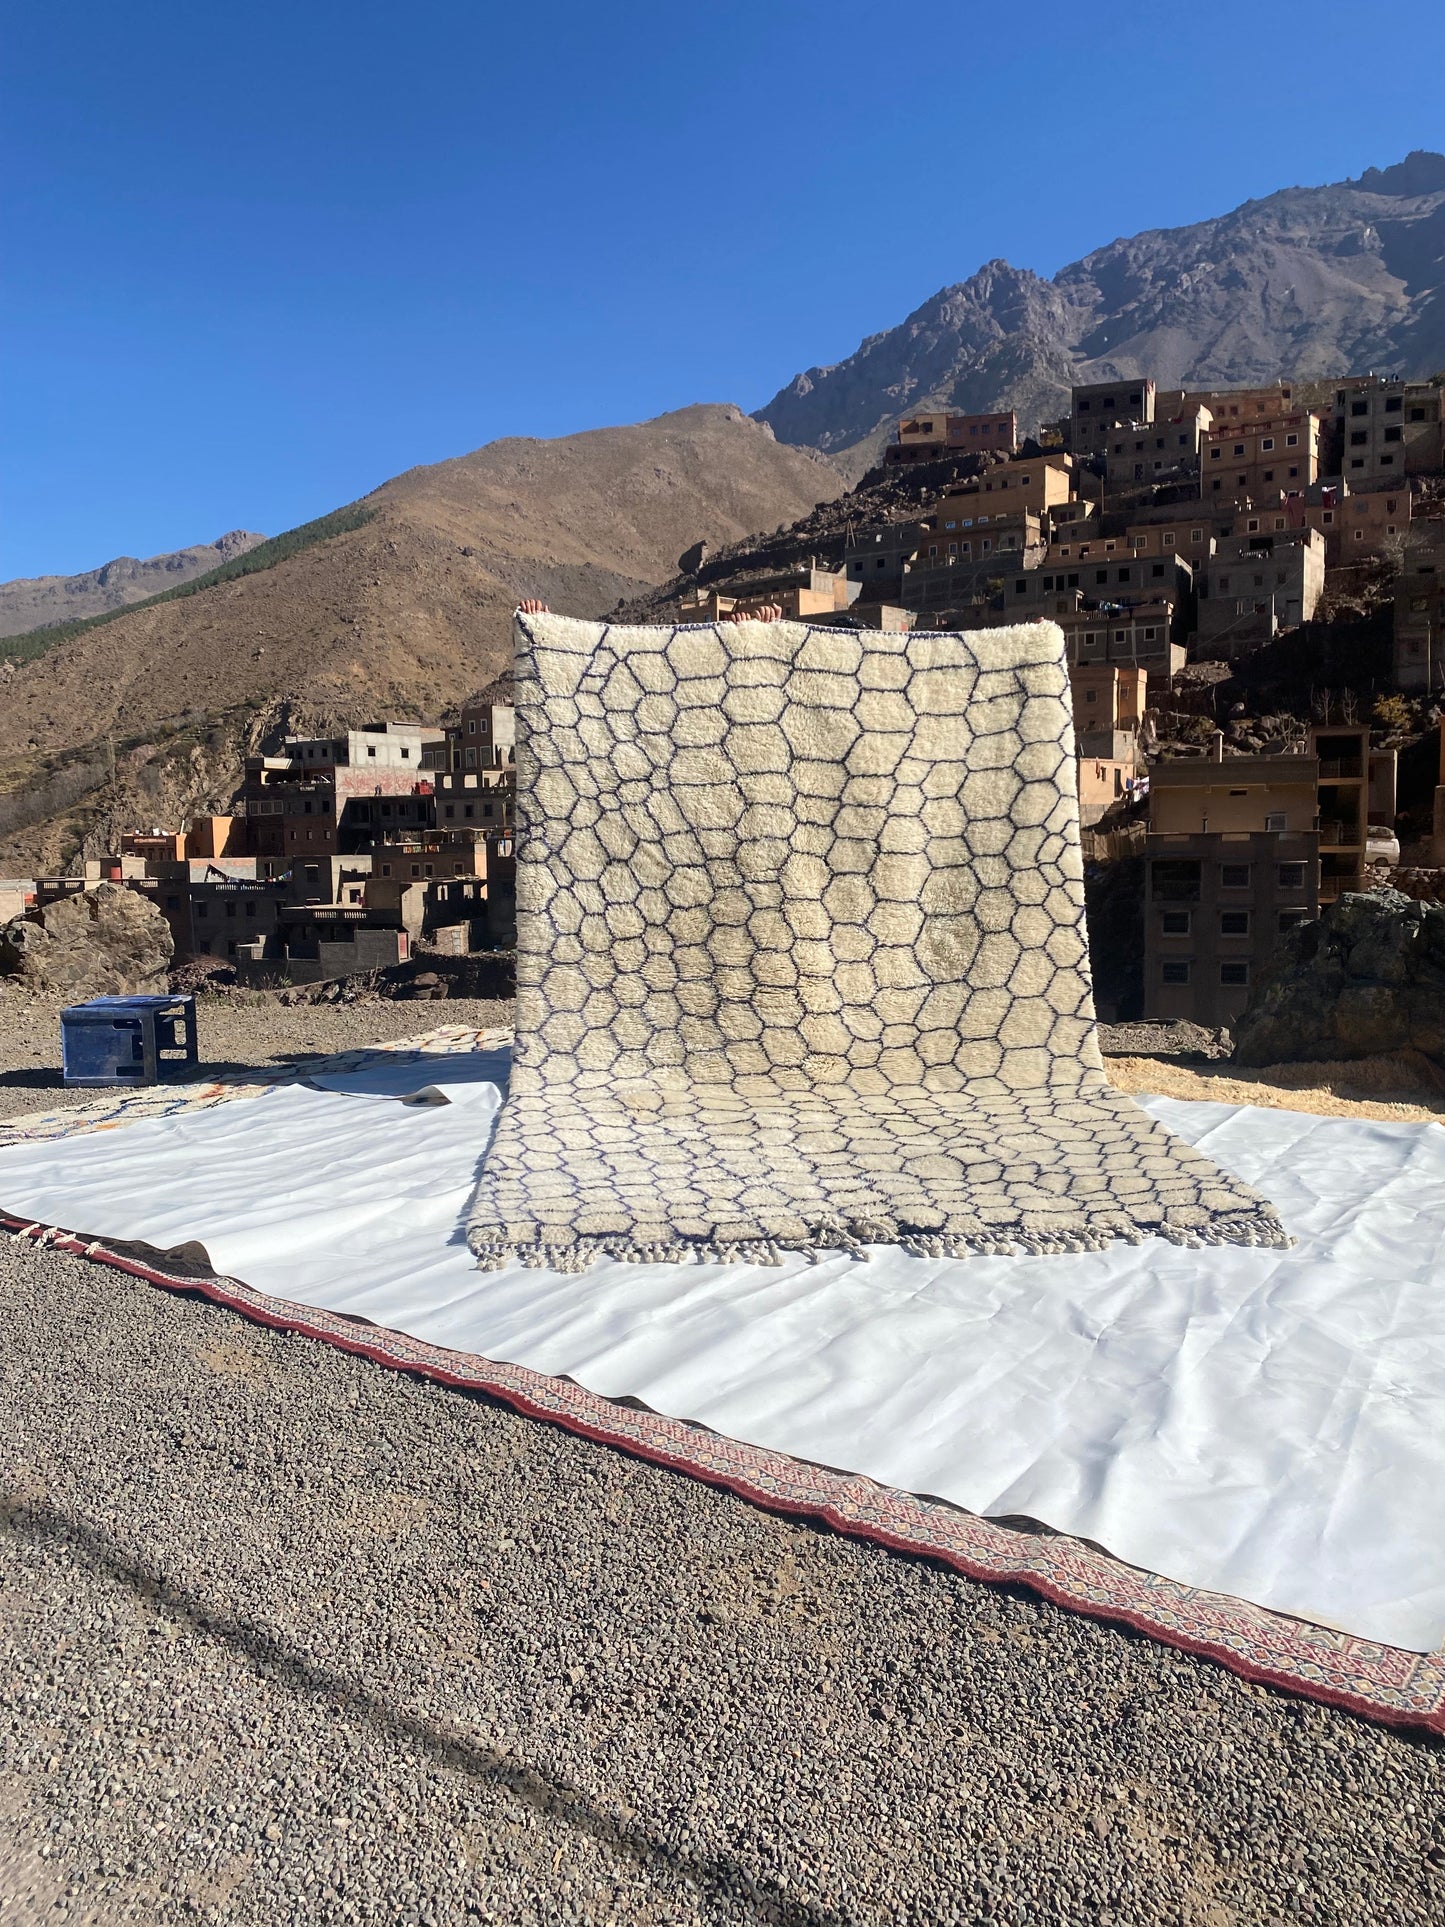 Beni Ourain rugs originate from the Atlas Mountains of Morocco and are characterized by their distinctive, neutral-toned, and geometric designs. These handwoven rugs often feature a plush pile and are made by the Berber tribes,  size is 320x206 cm